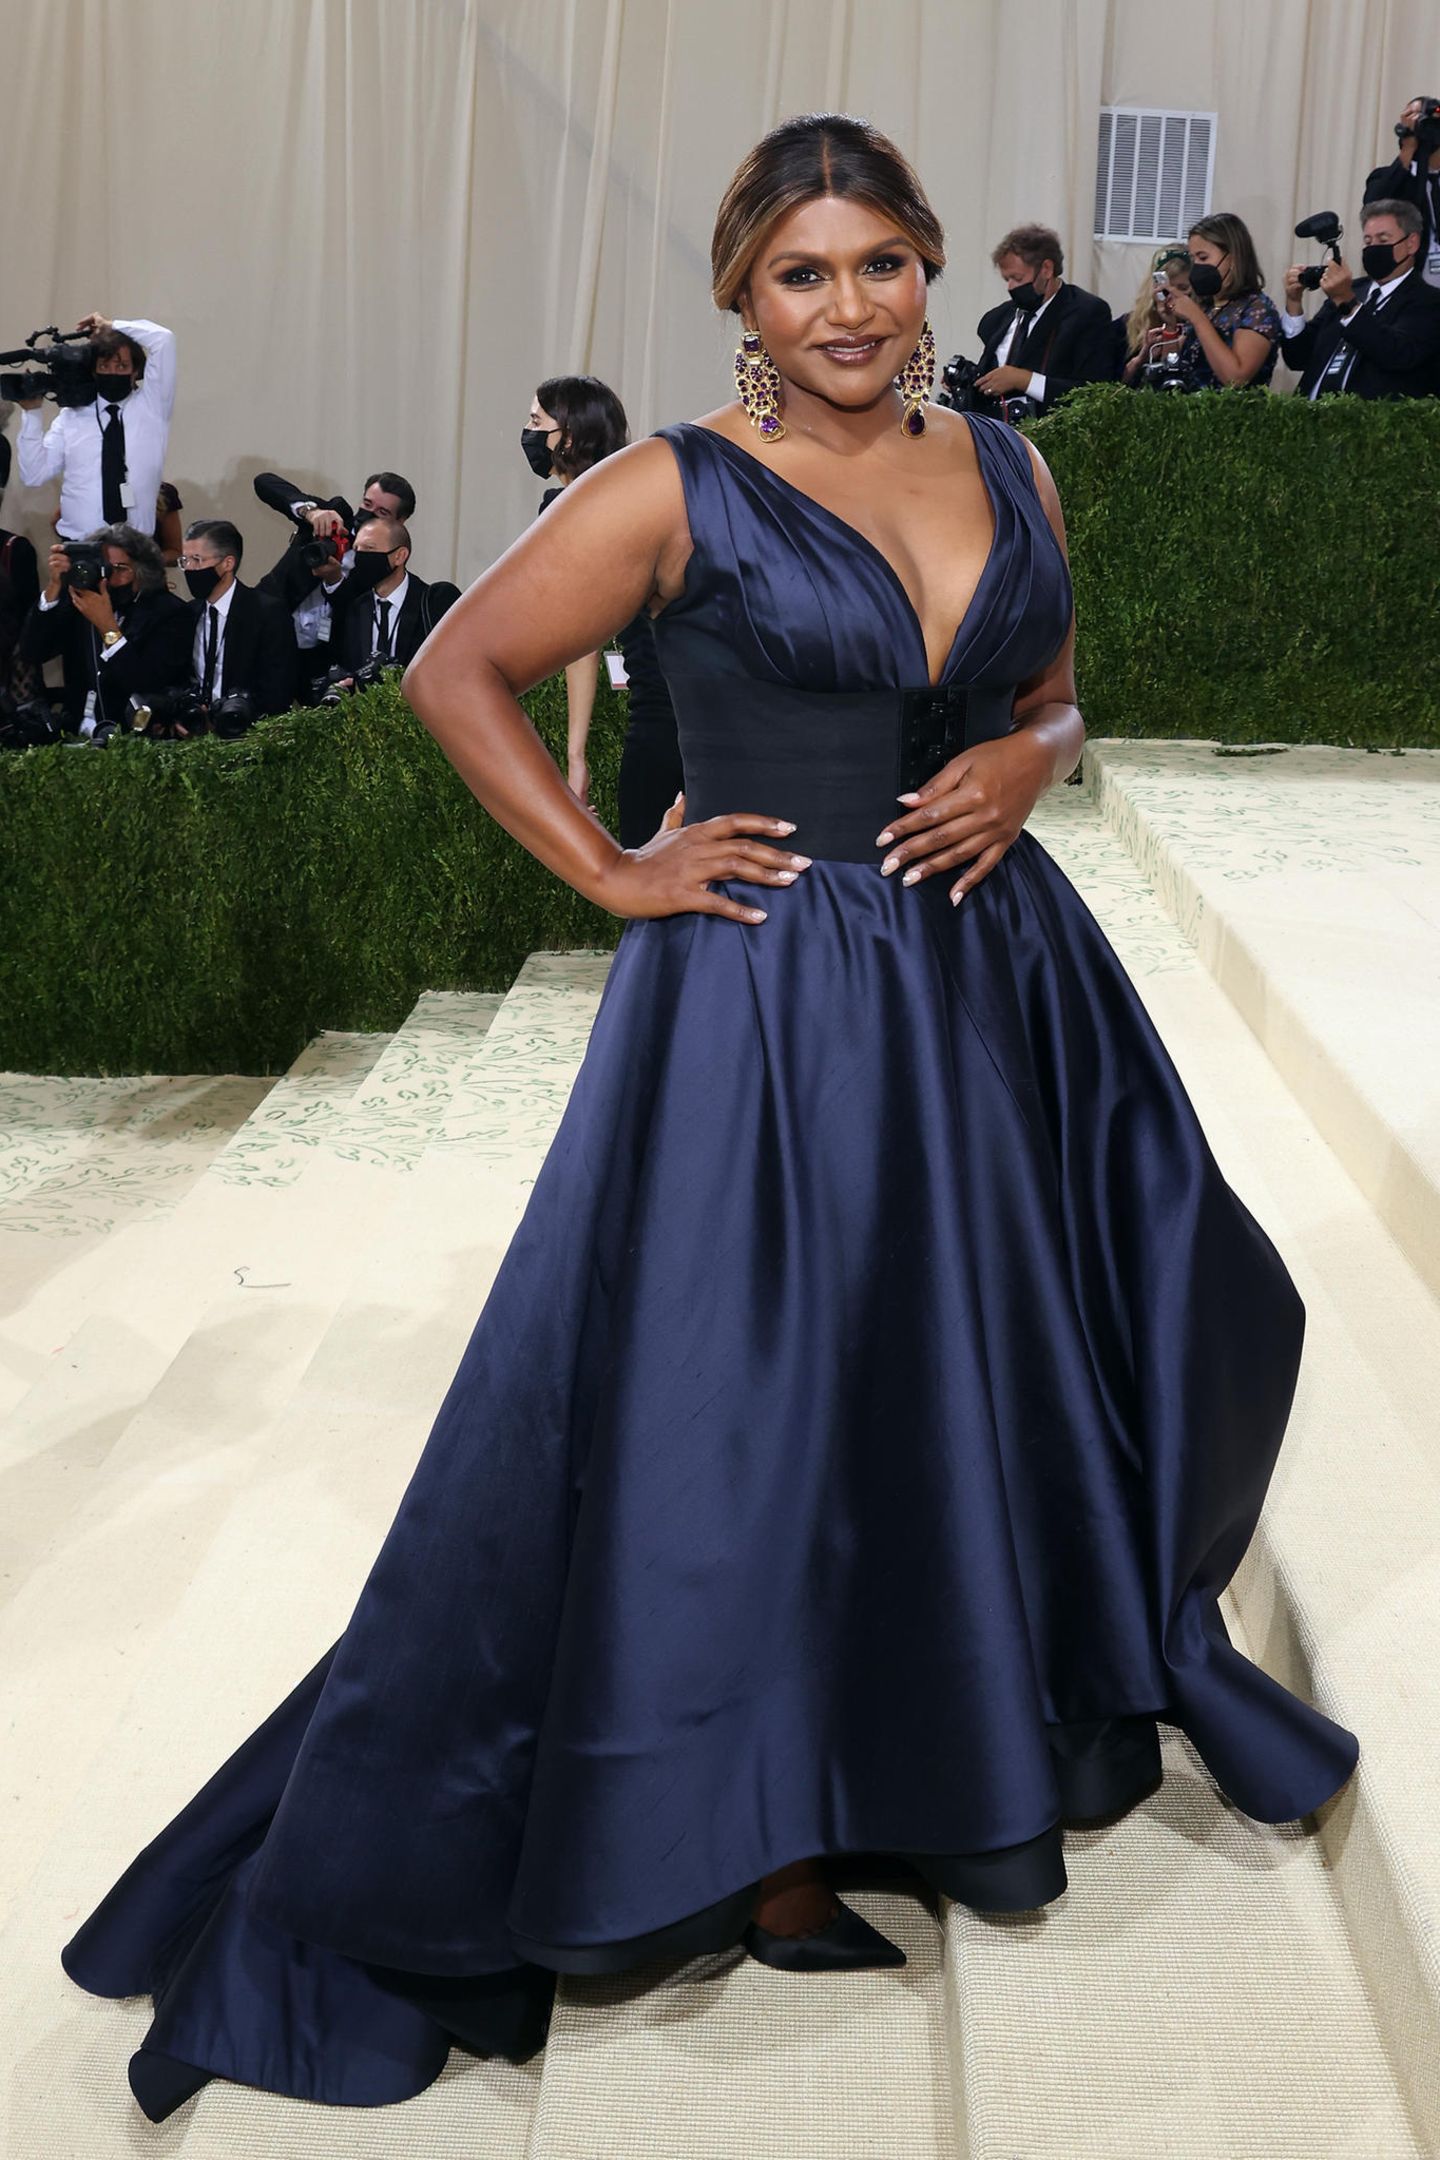 Mindy Kaling strahlt in Tory Burch.